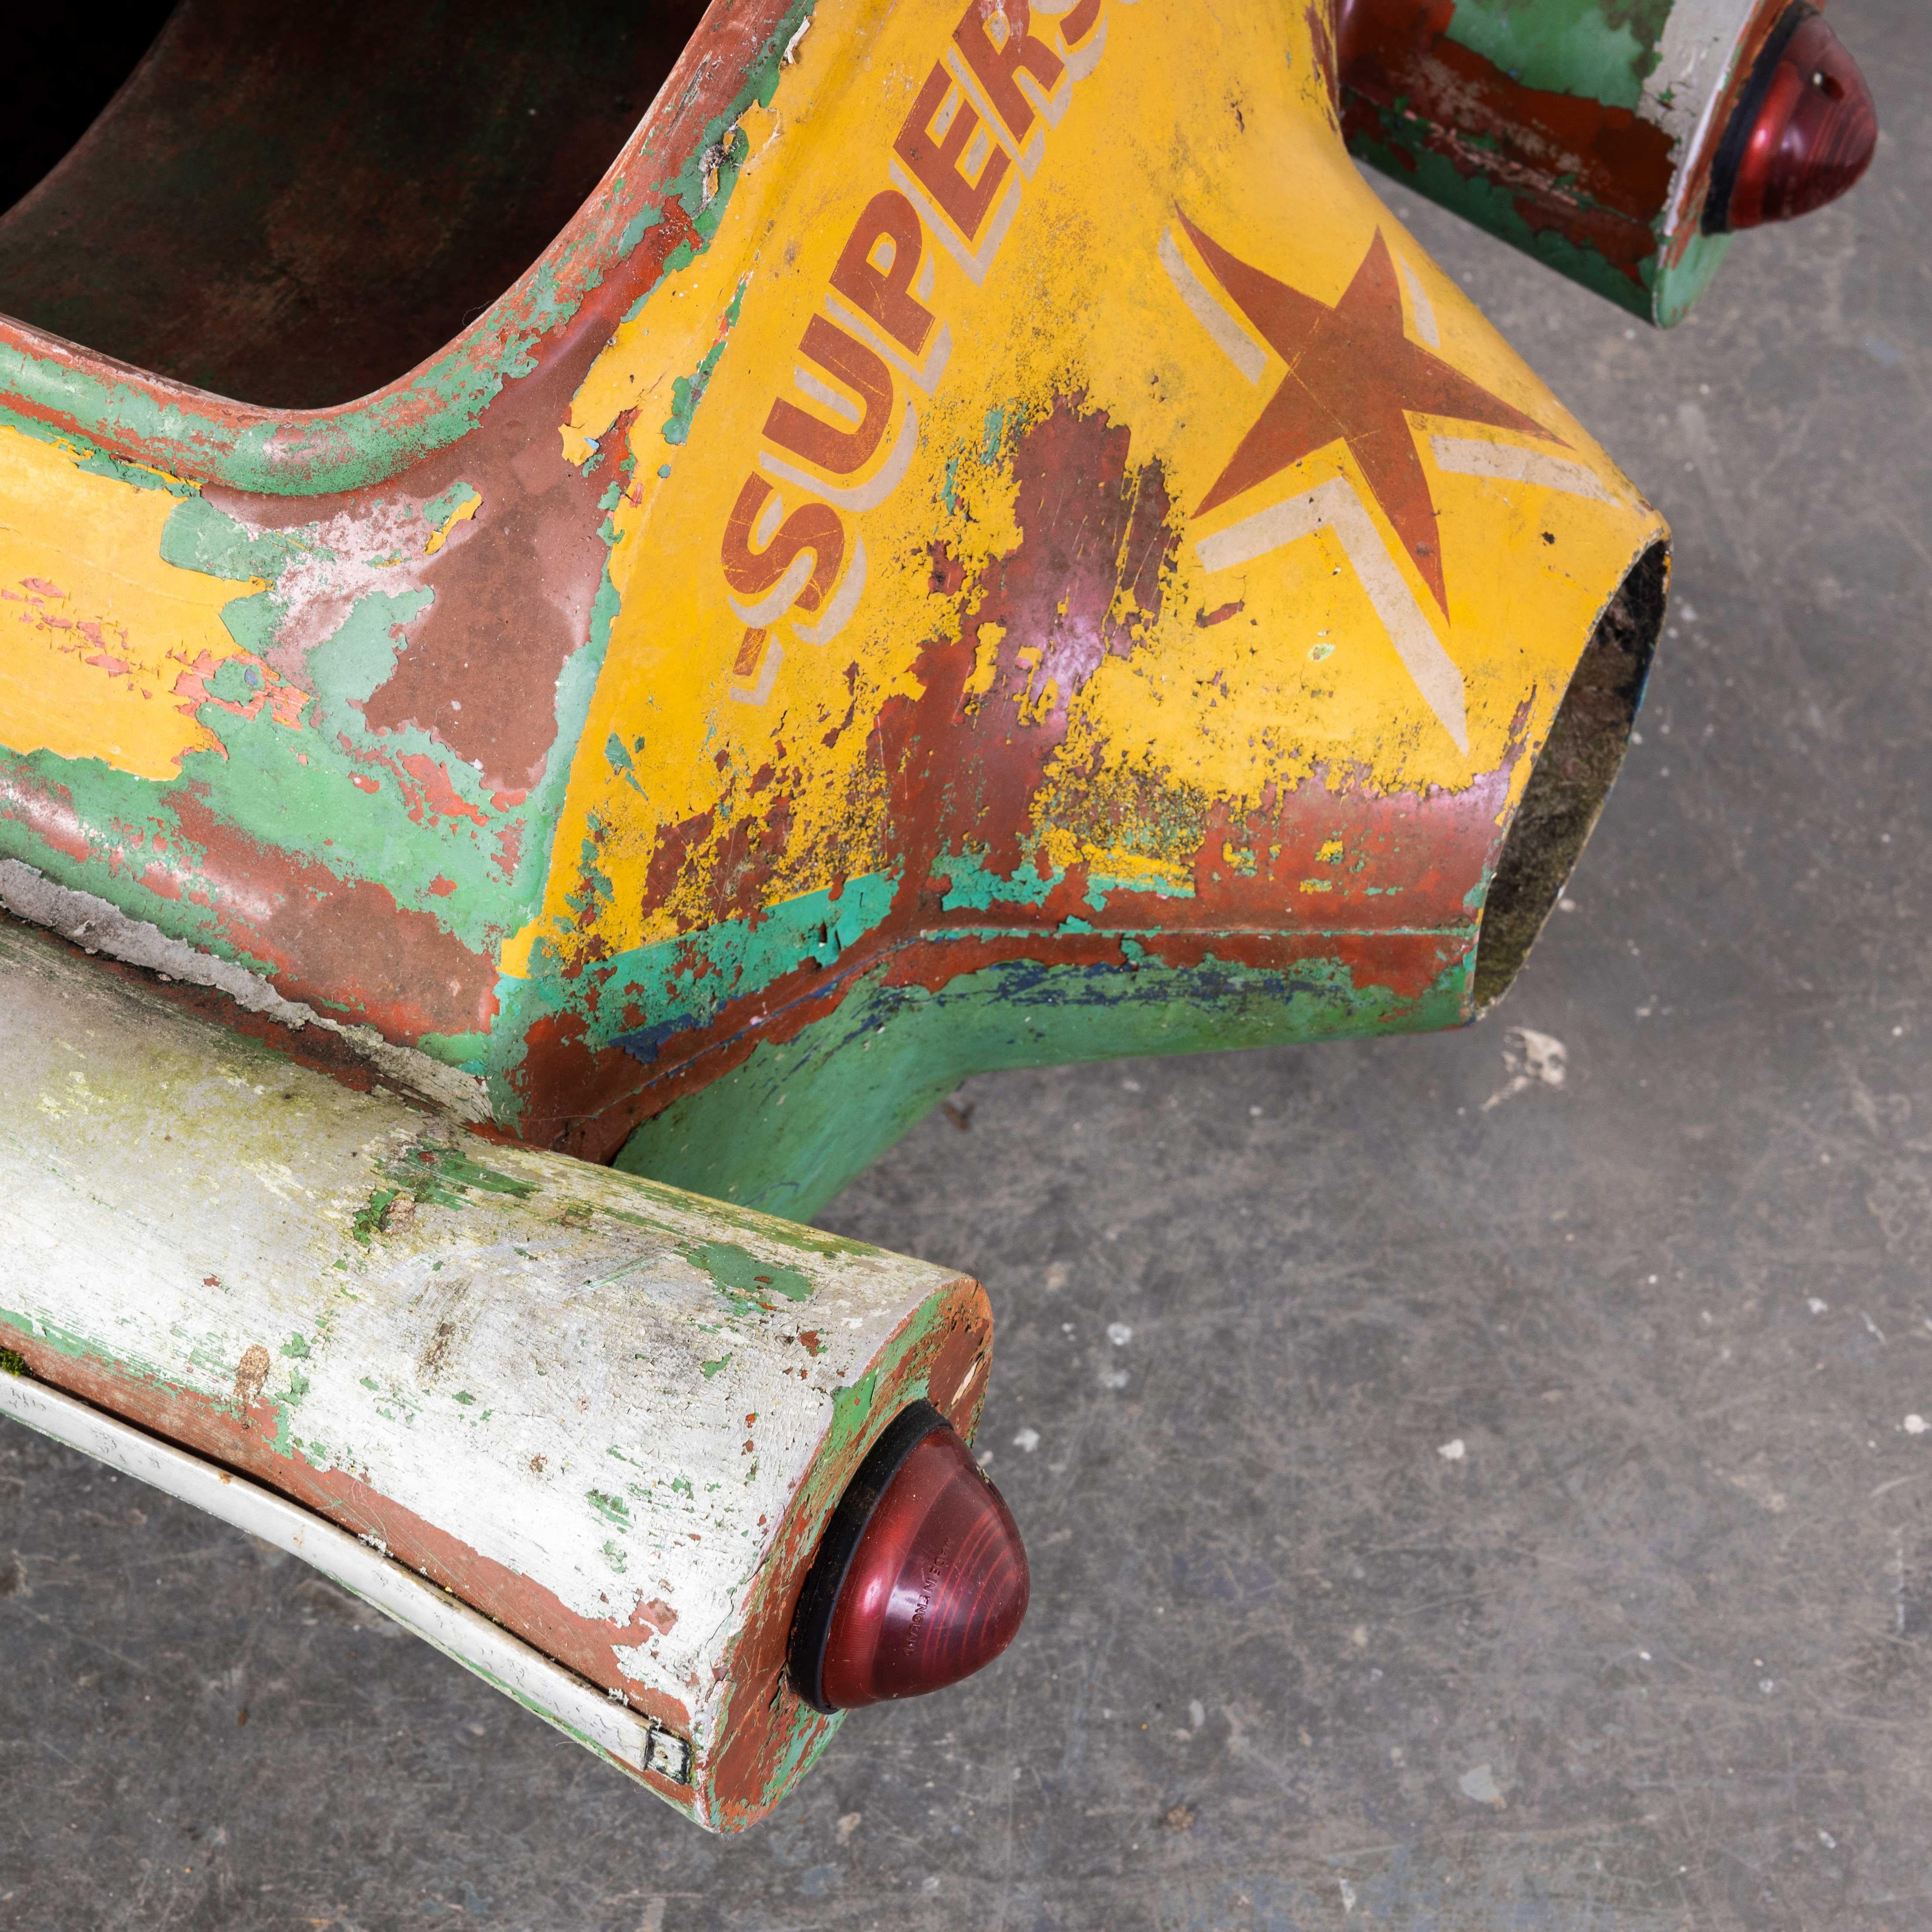 1950s Original Fairground Rocket Ride – hand painted
1950s Original Fairground Rocket Ride – Hand painted. Classic handmade and hand painted fairground rocket. The rocket would have been mounted on a merry go round type platform along with buses